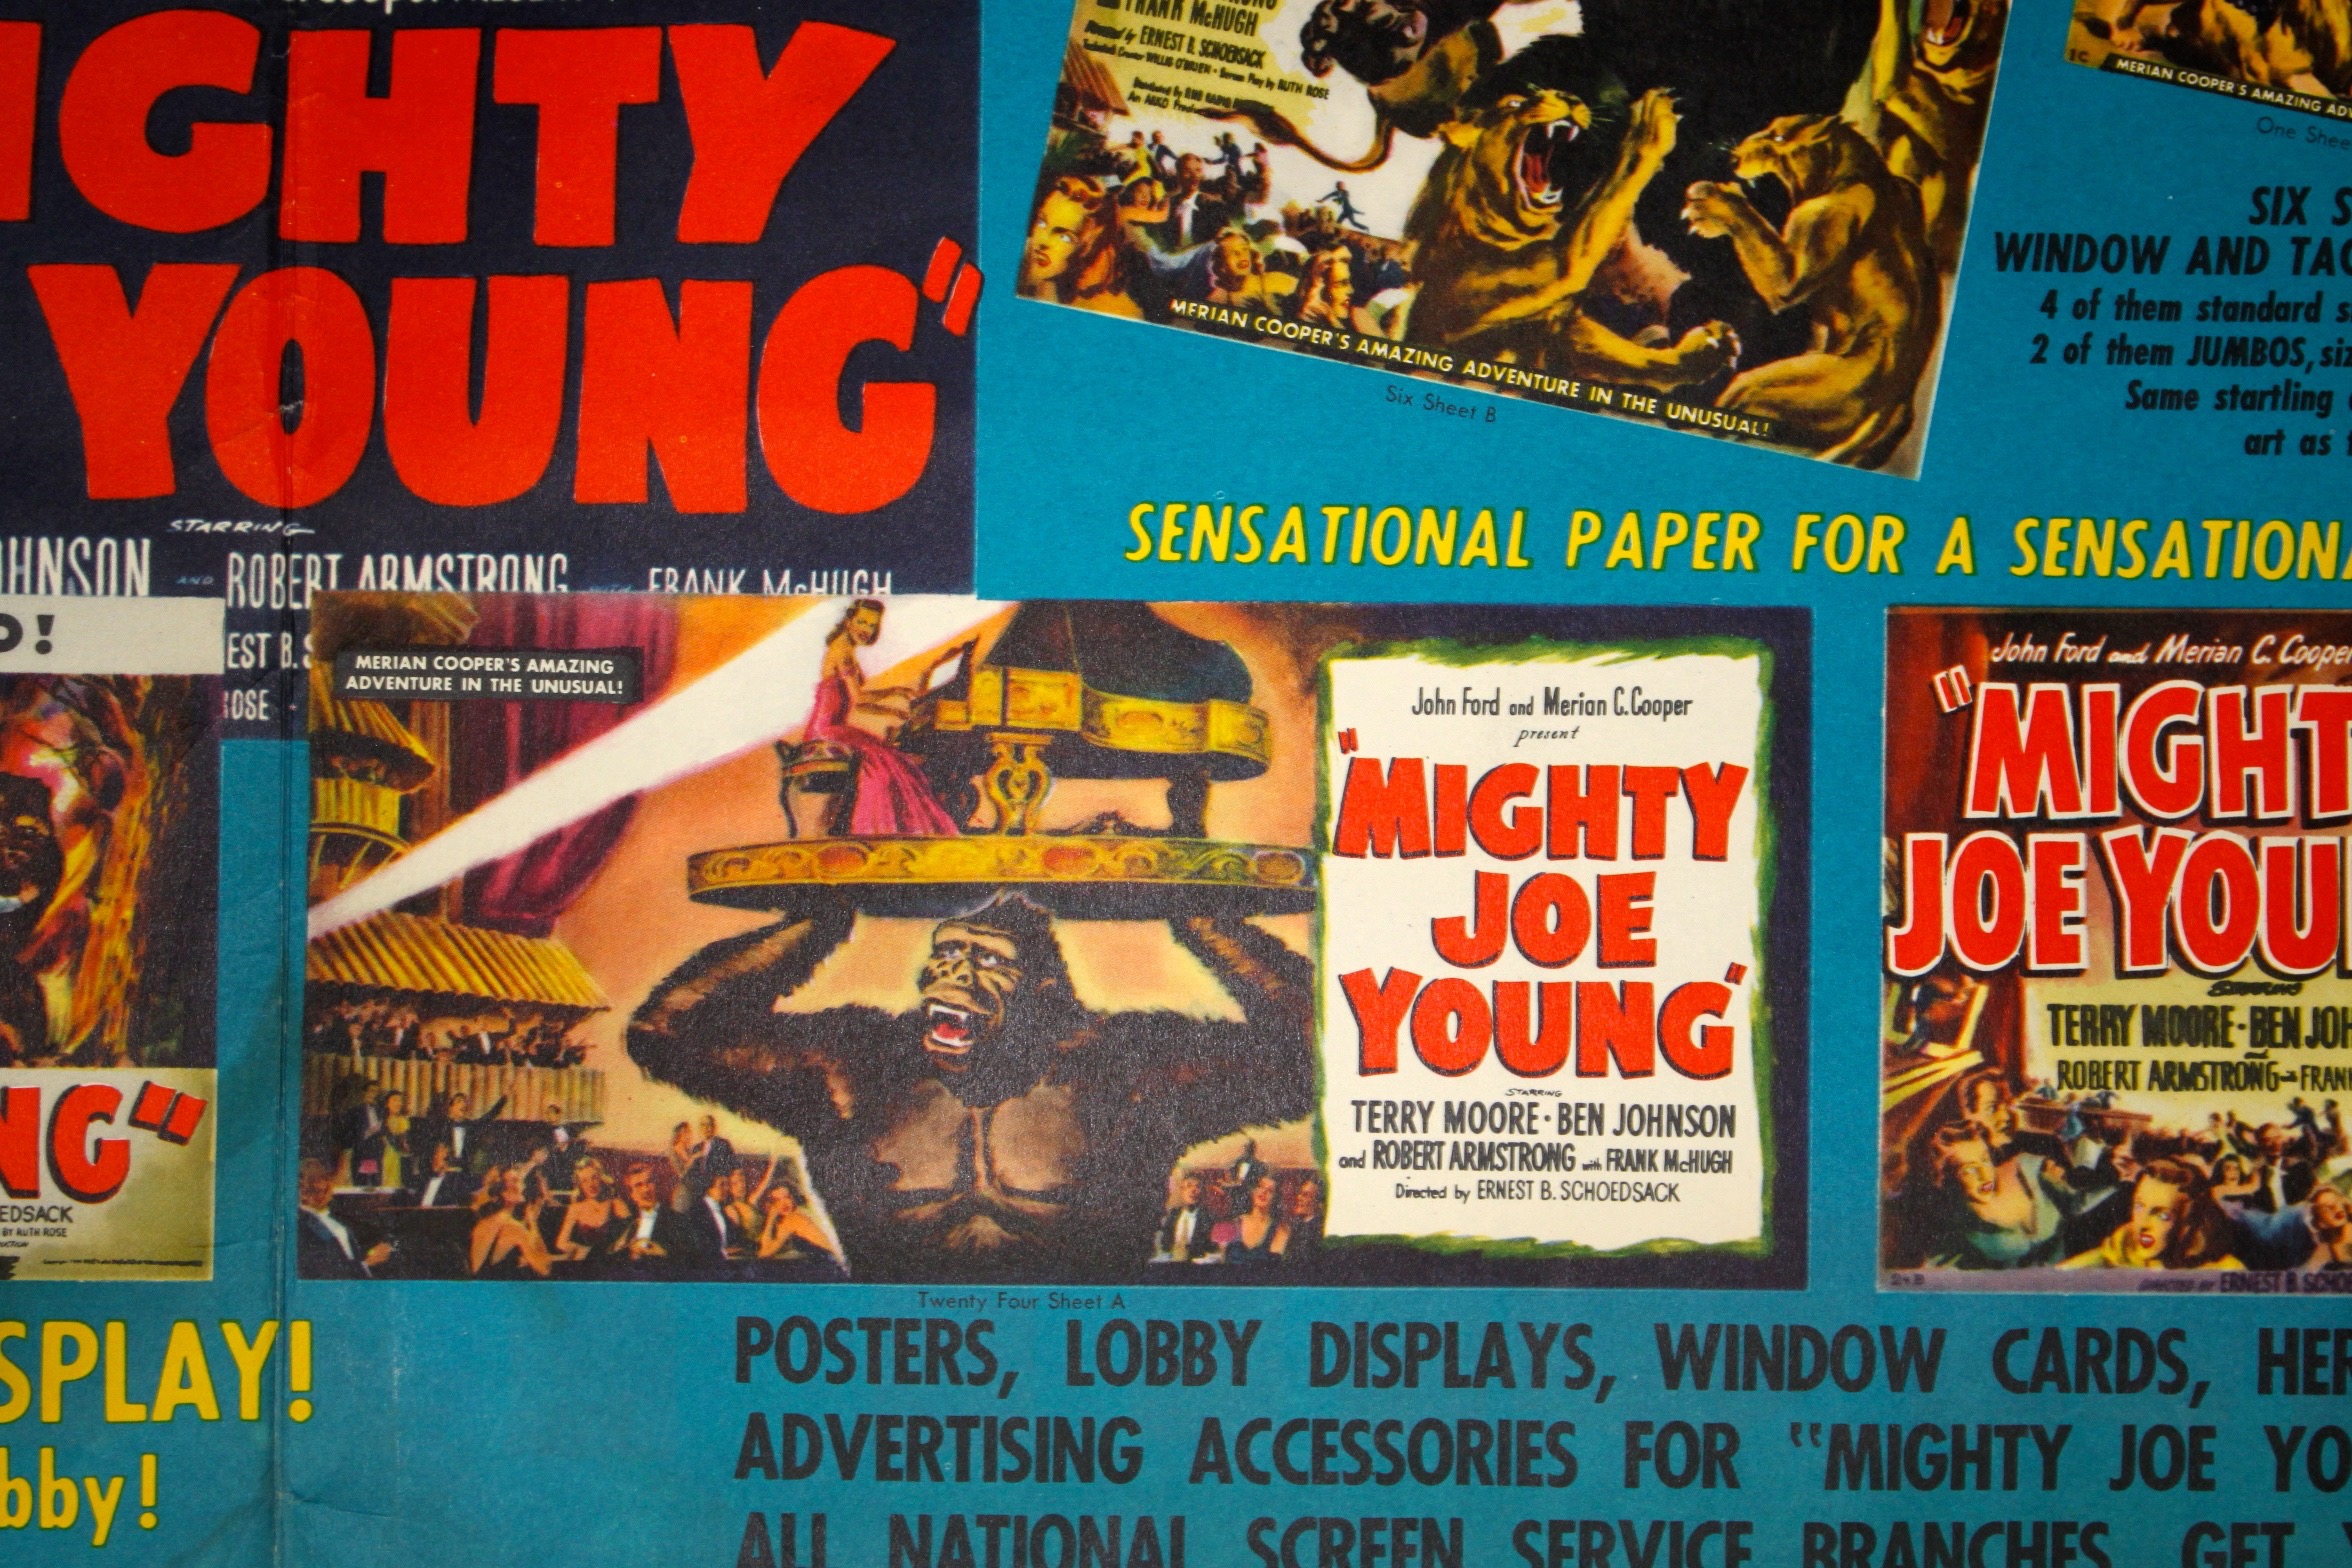 Mighty Joe Young Pressbook With Jacket
1949 - 21729